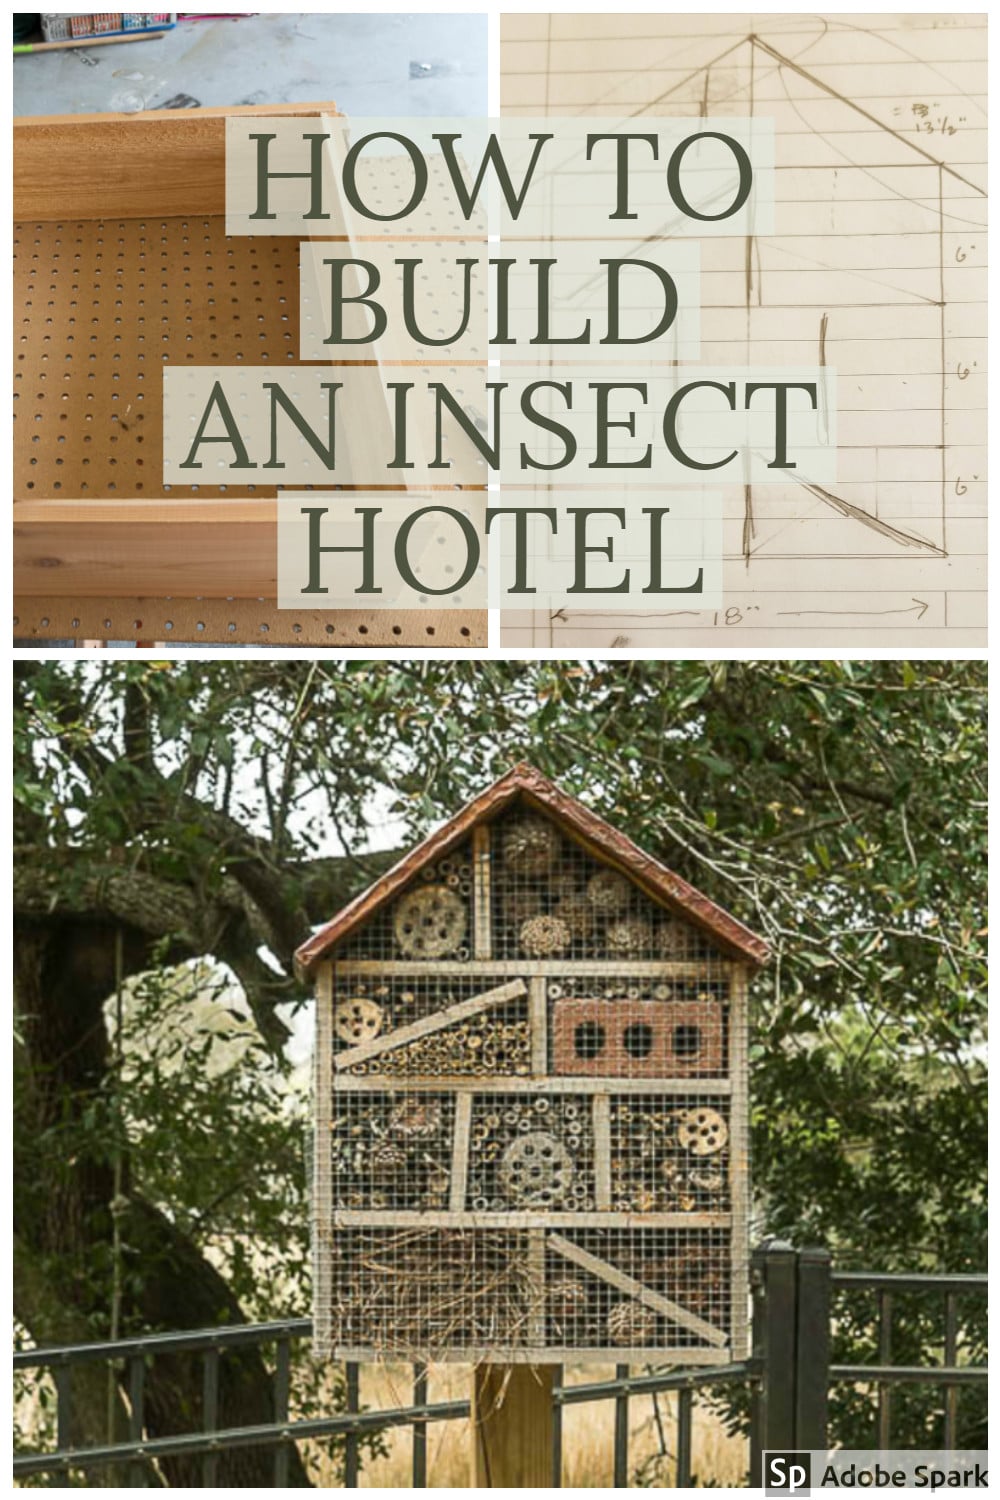 INSECT HOTEL AND PLANS